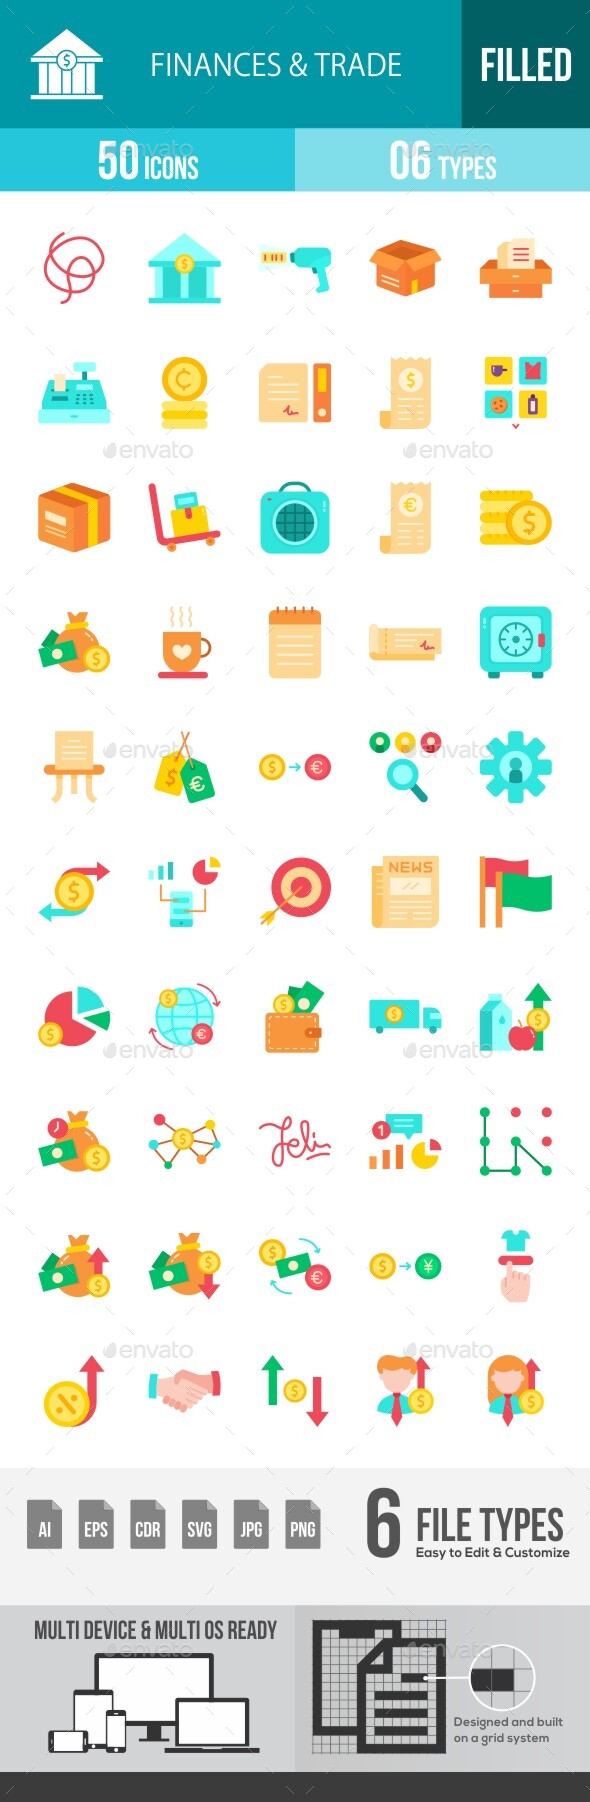 [DOWNLOAD]Finances & Trade Flat Multicolor Icons